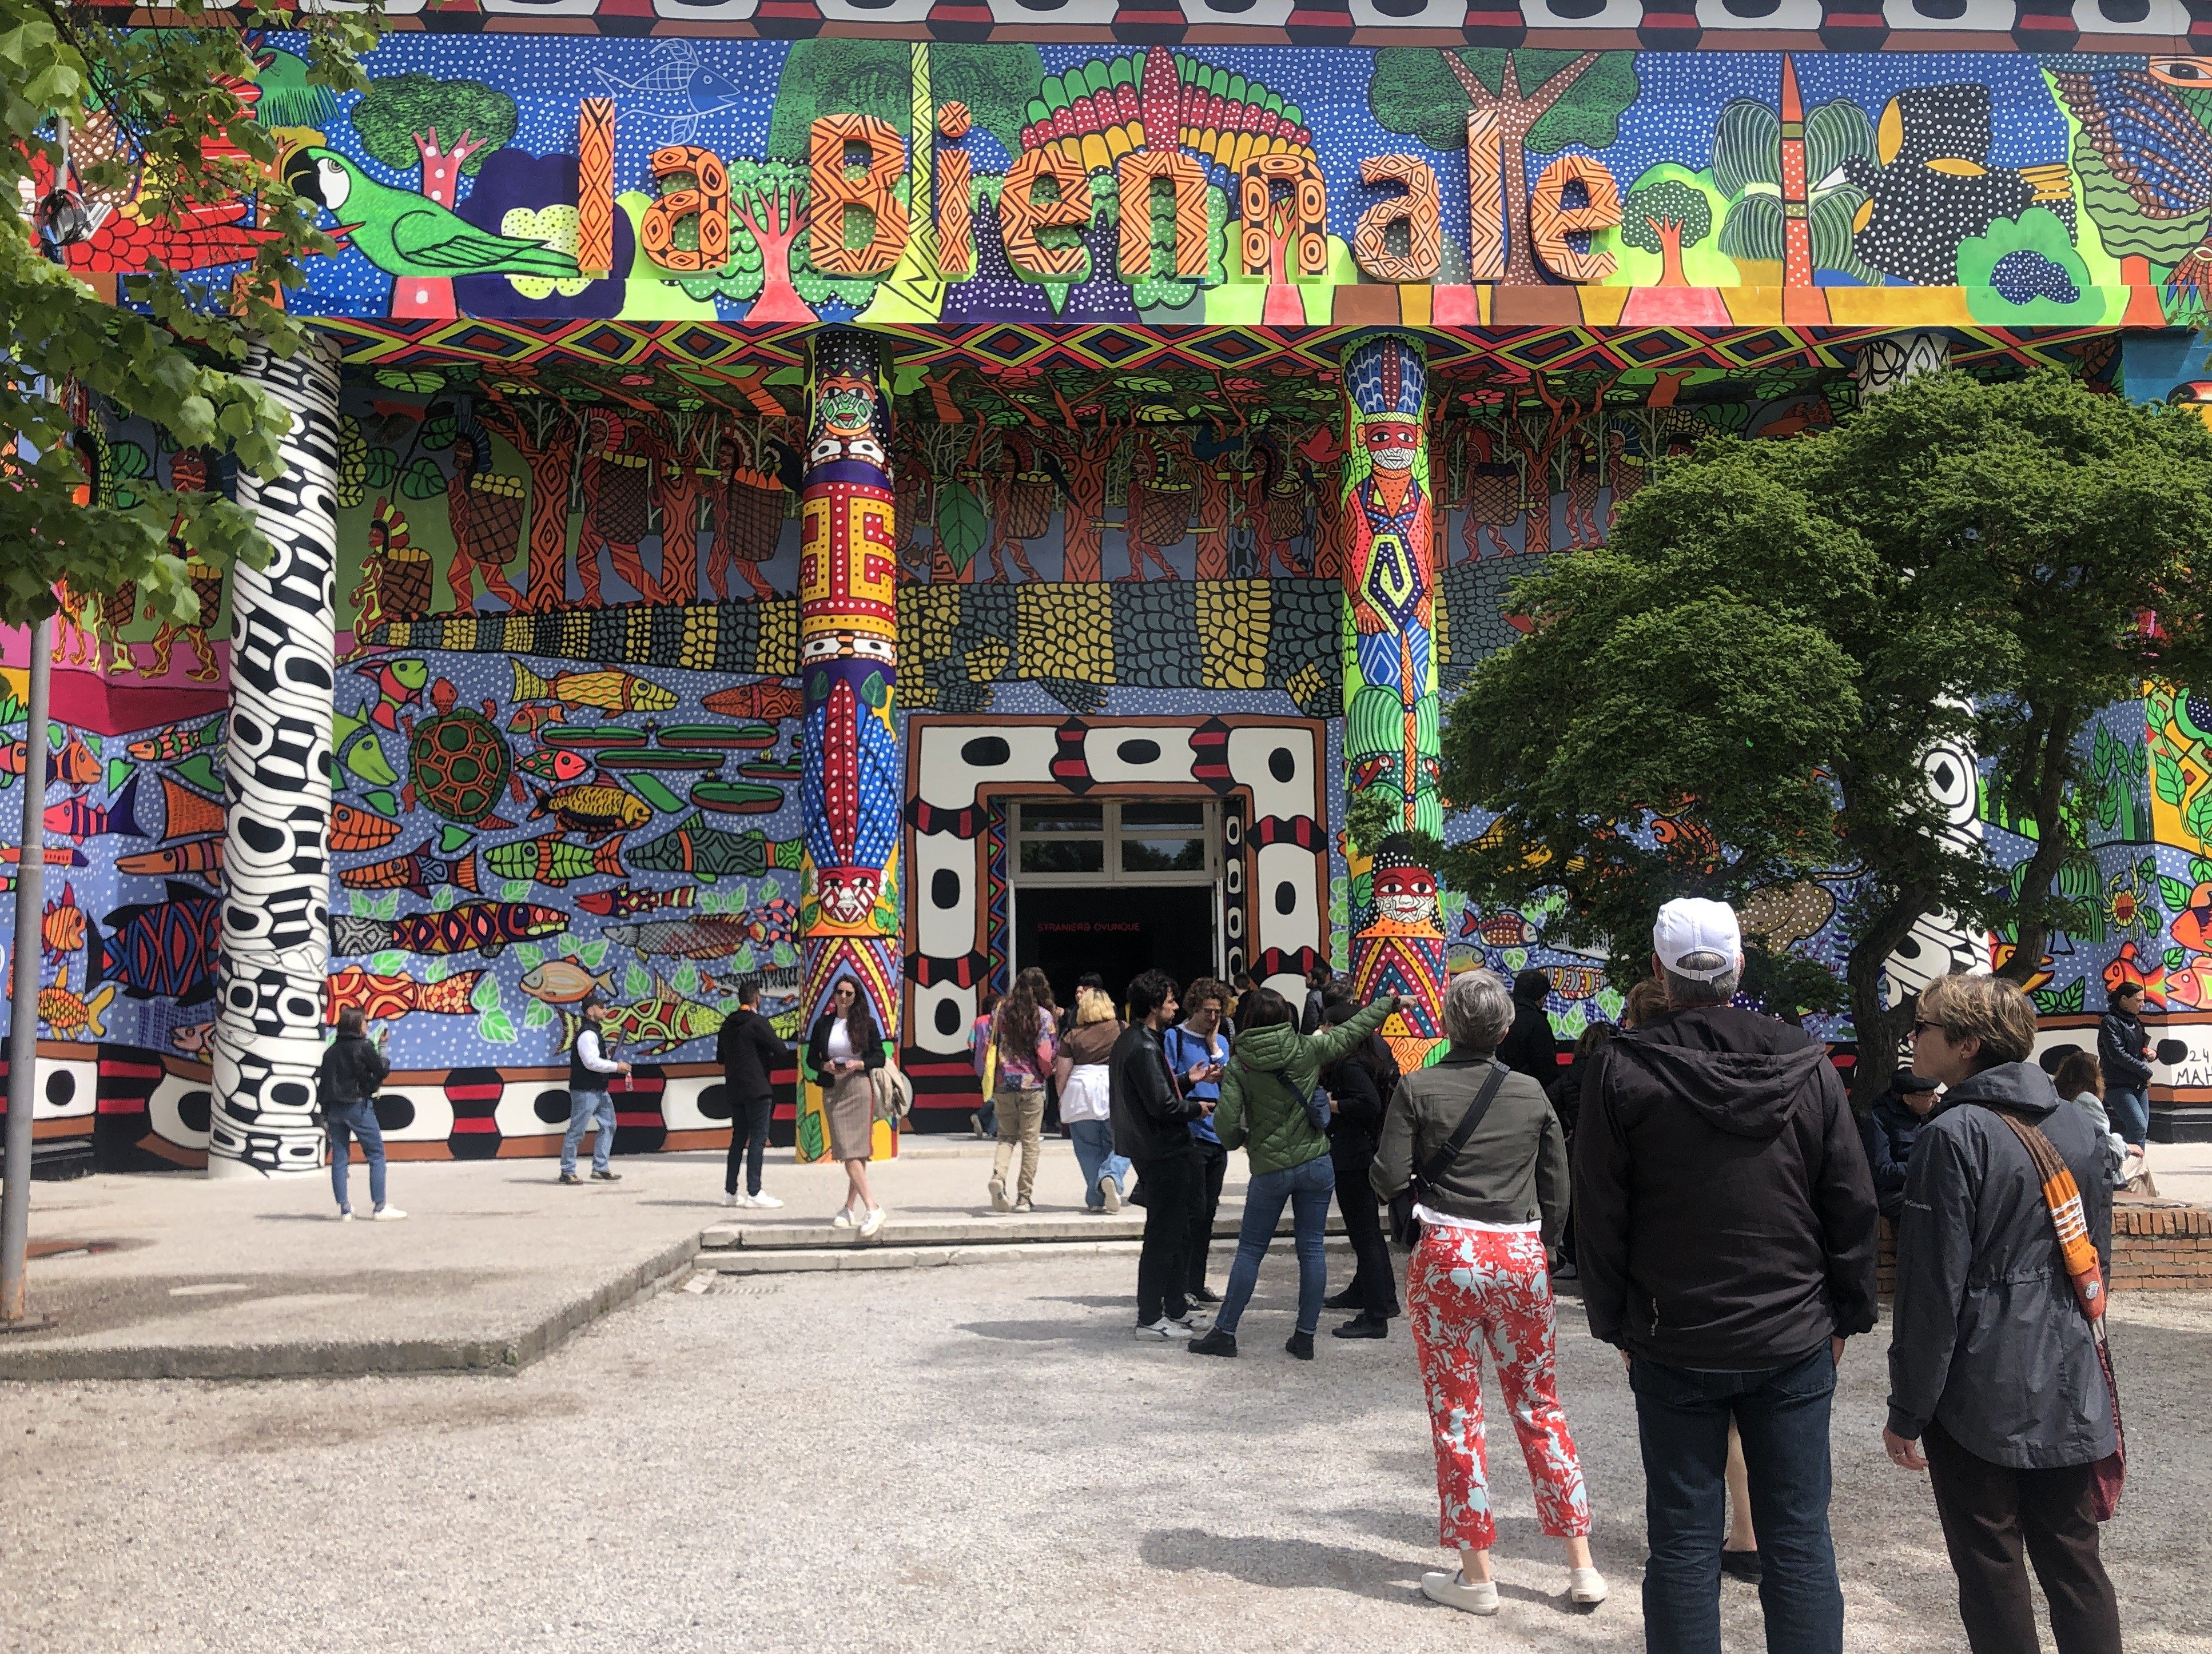 Visitors at the Central Pavilion of the Giardini section of the Venice Biennale. Photo: Enid Tsui